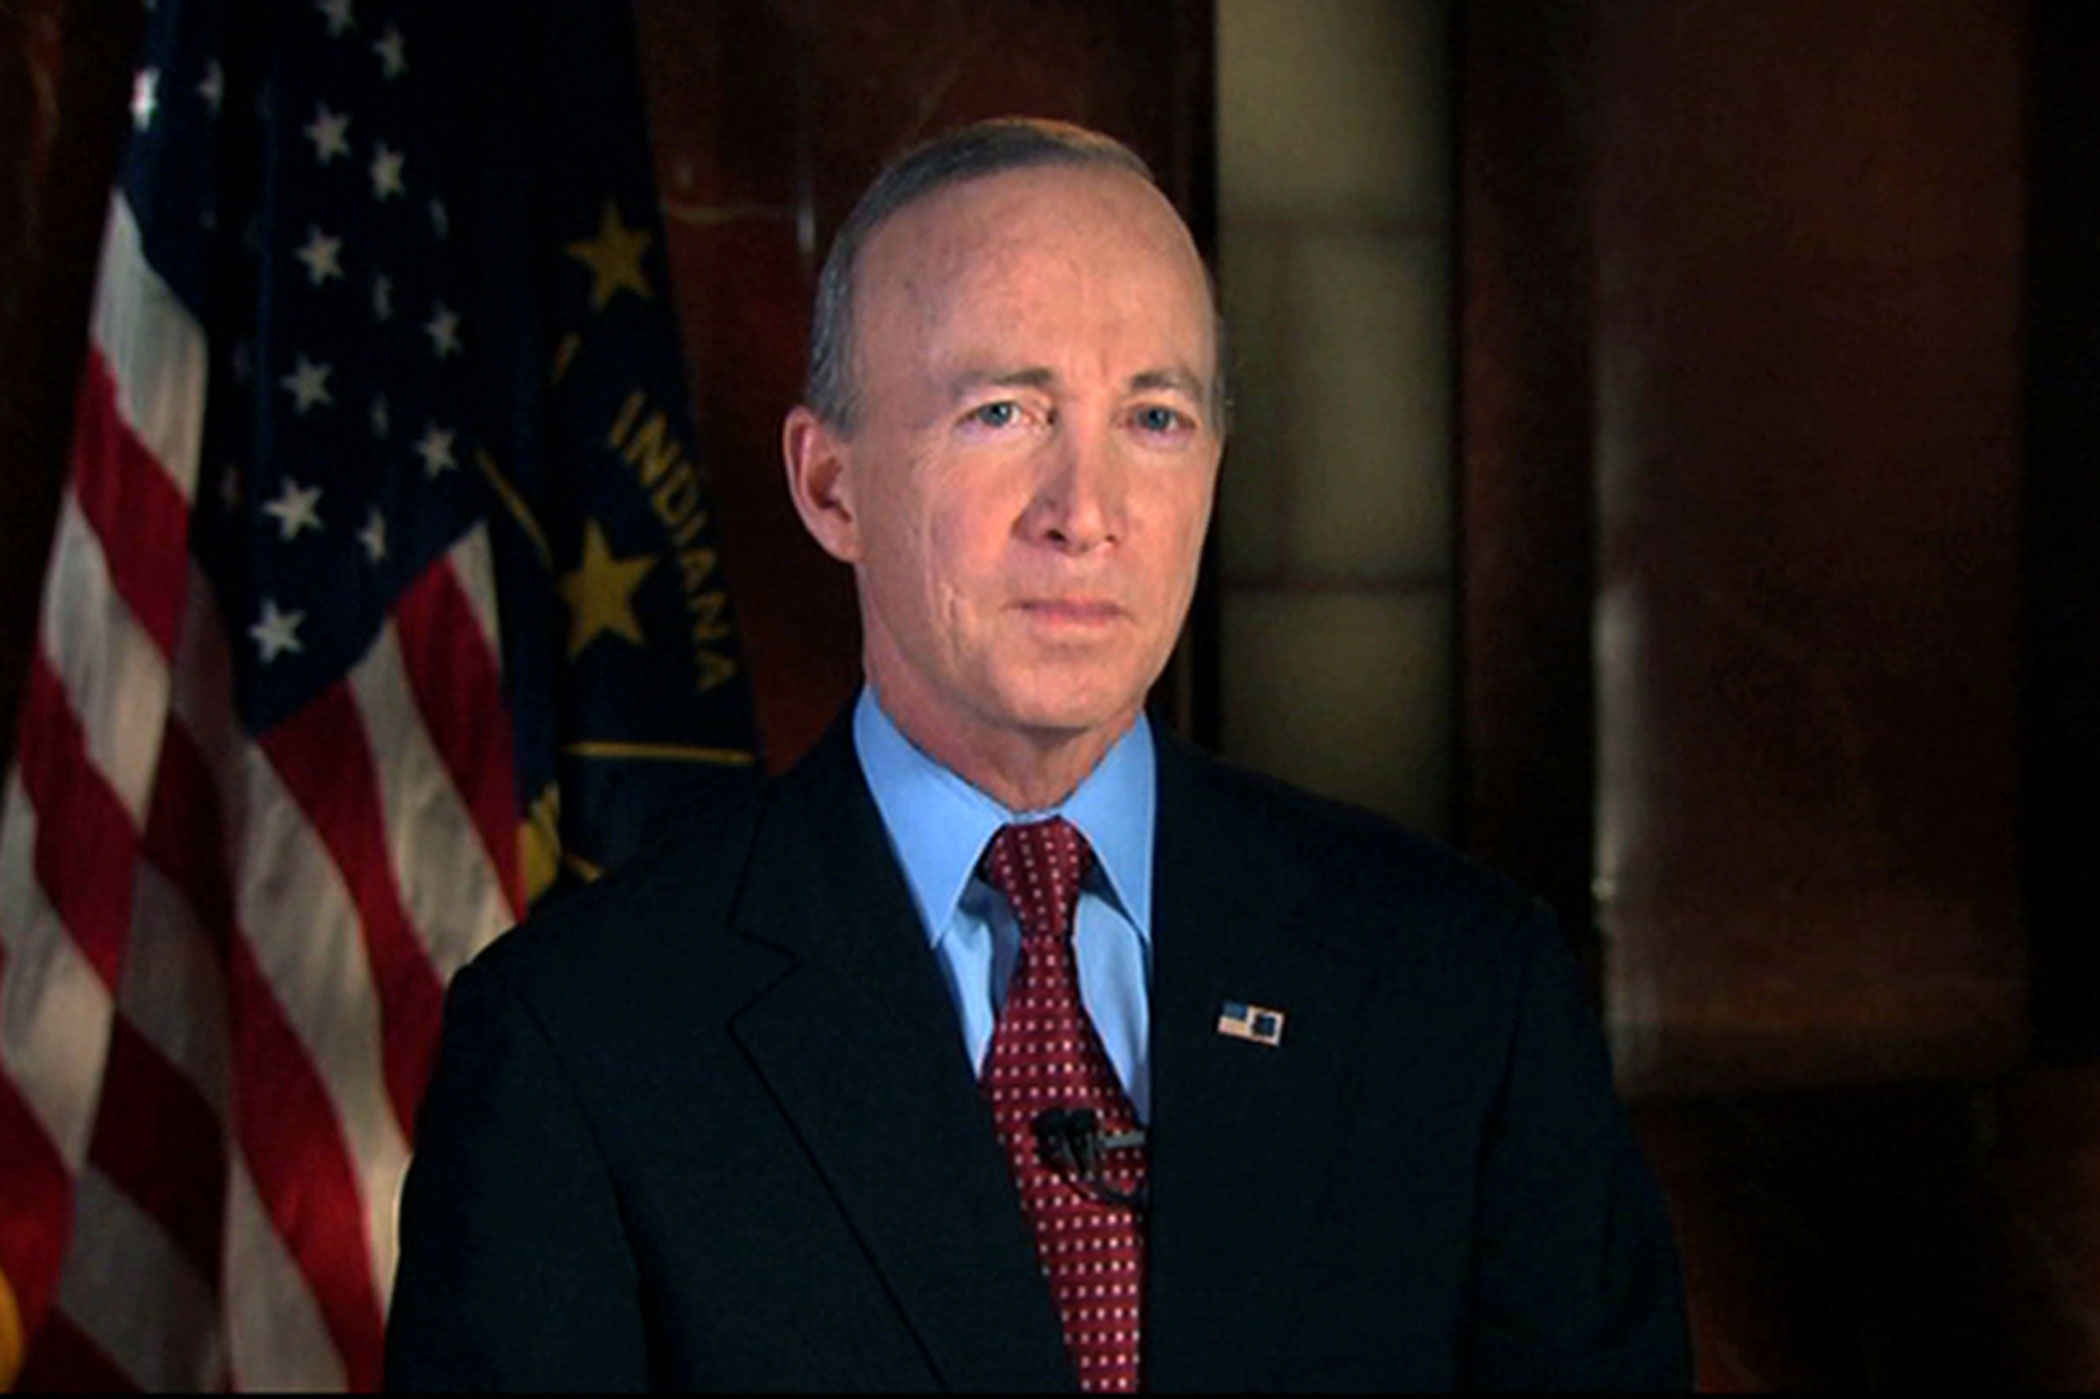 This still image from video shows Indiana Gov. Mitch Daniels delivering the Republican response to President Barack Obama's State of the Union address in Washington on Jan. 24, 2012.